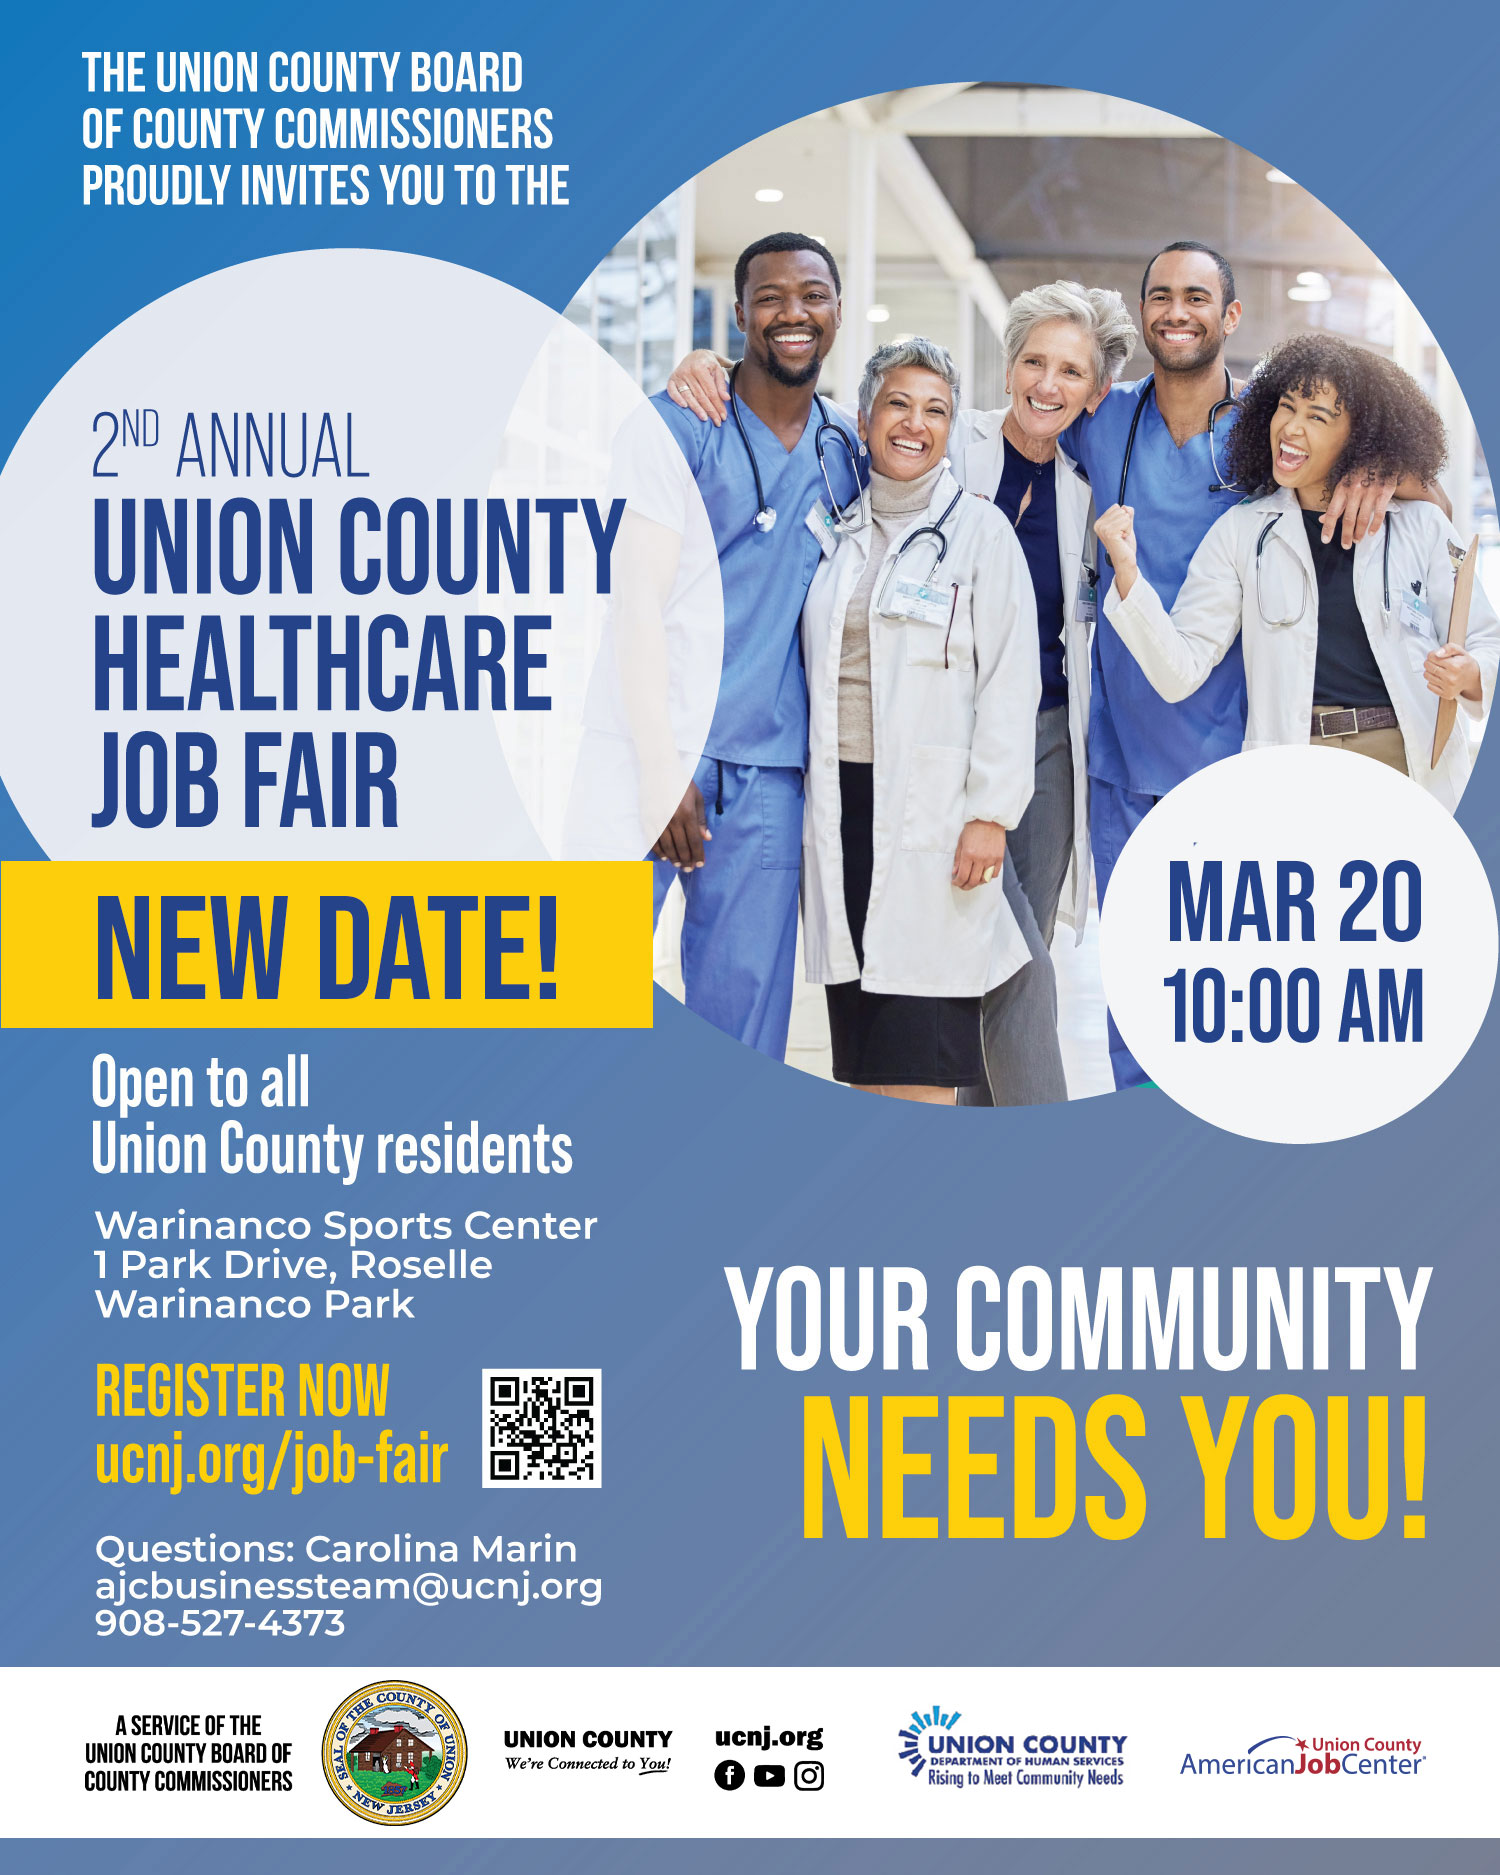 Union County’s Healthcare Job Fair Connects Professionals With Promising Opportunities